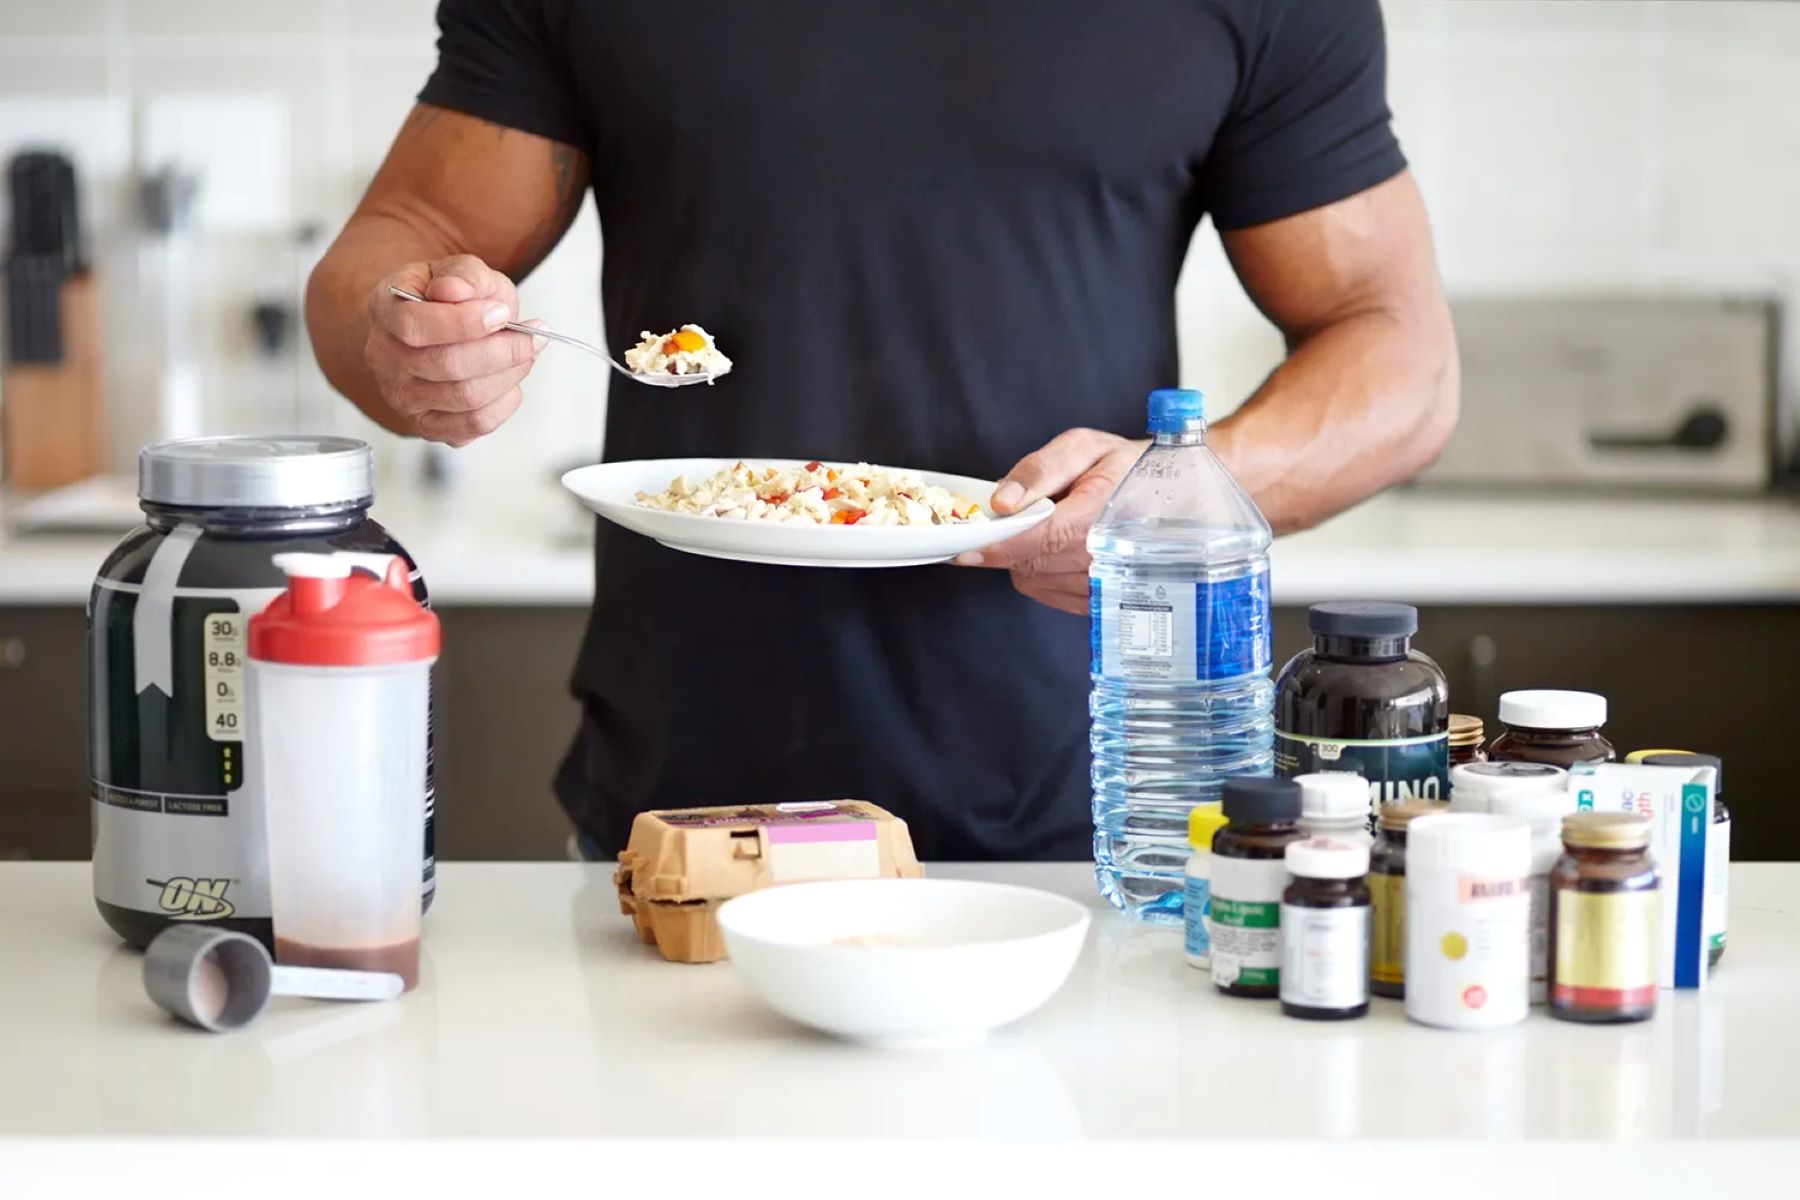 How To Make Pre-Workout